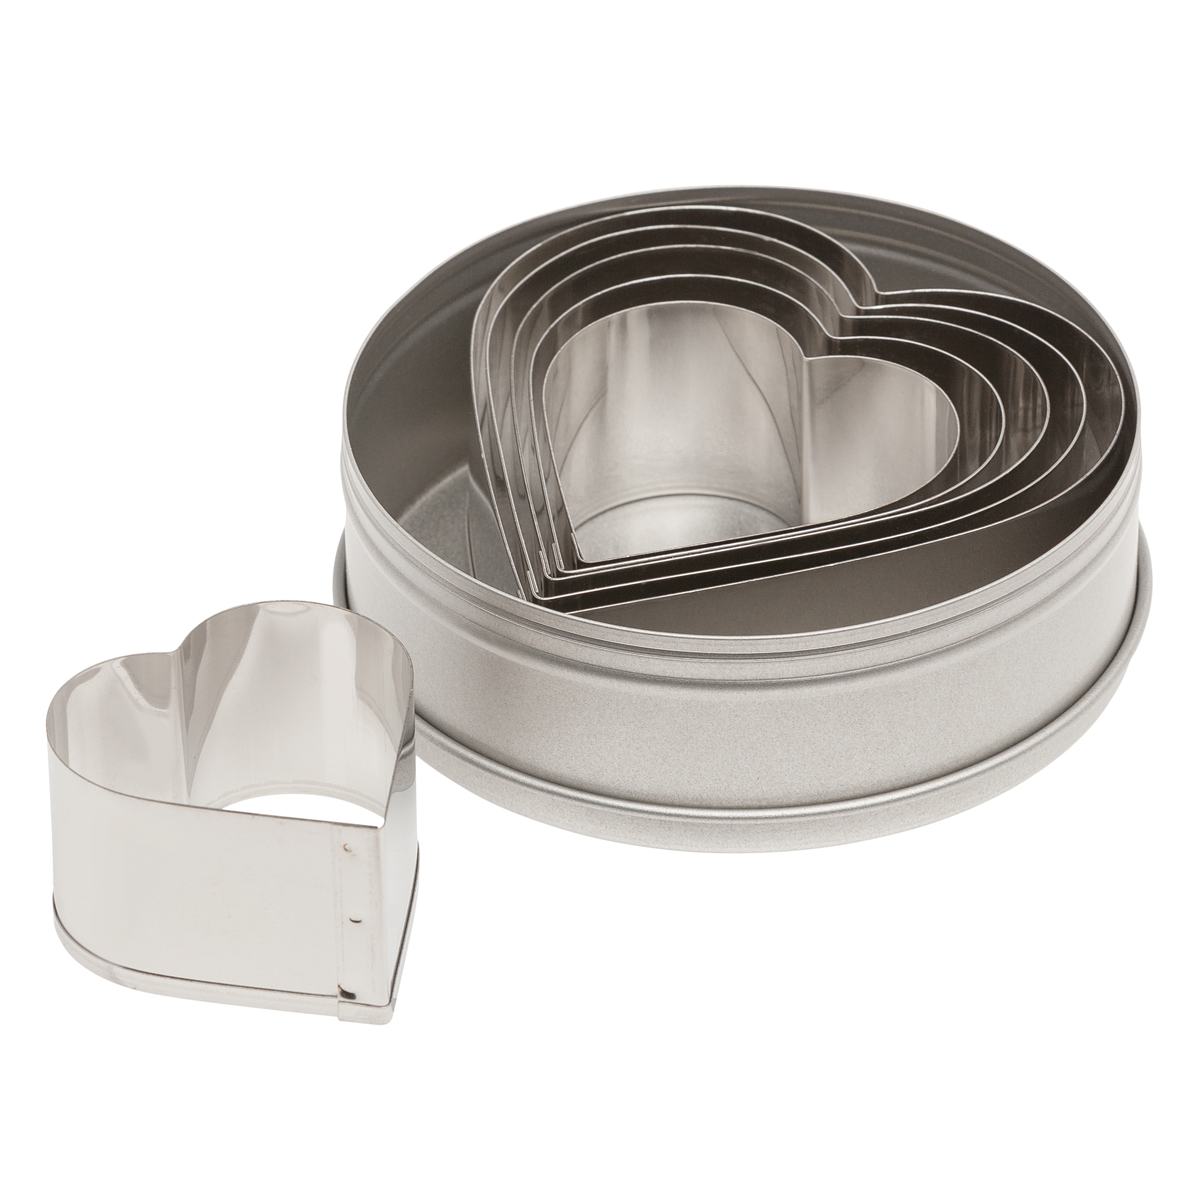 Ateco Heart Cutter Set - Plain - Stainless Steel. Sizes ranging from 1-3/4" to 3-3/4" diam. 6 Pc.Set.